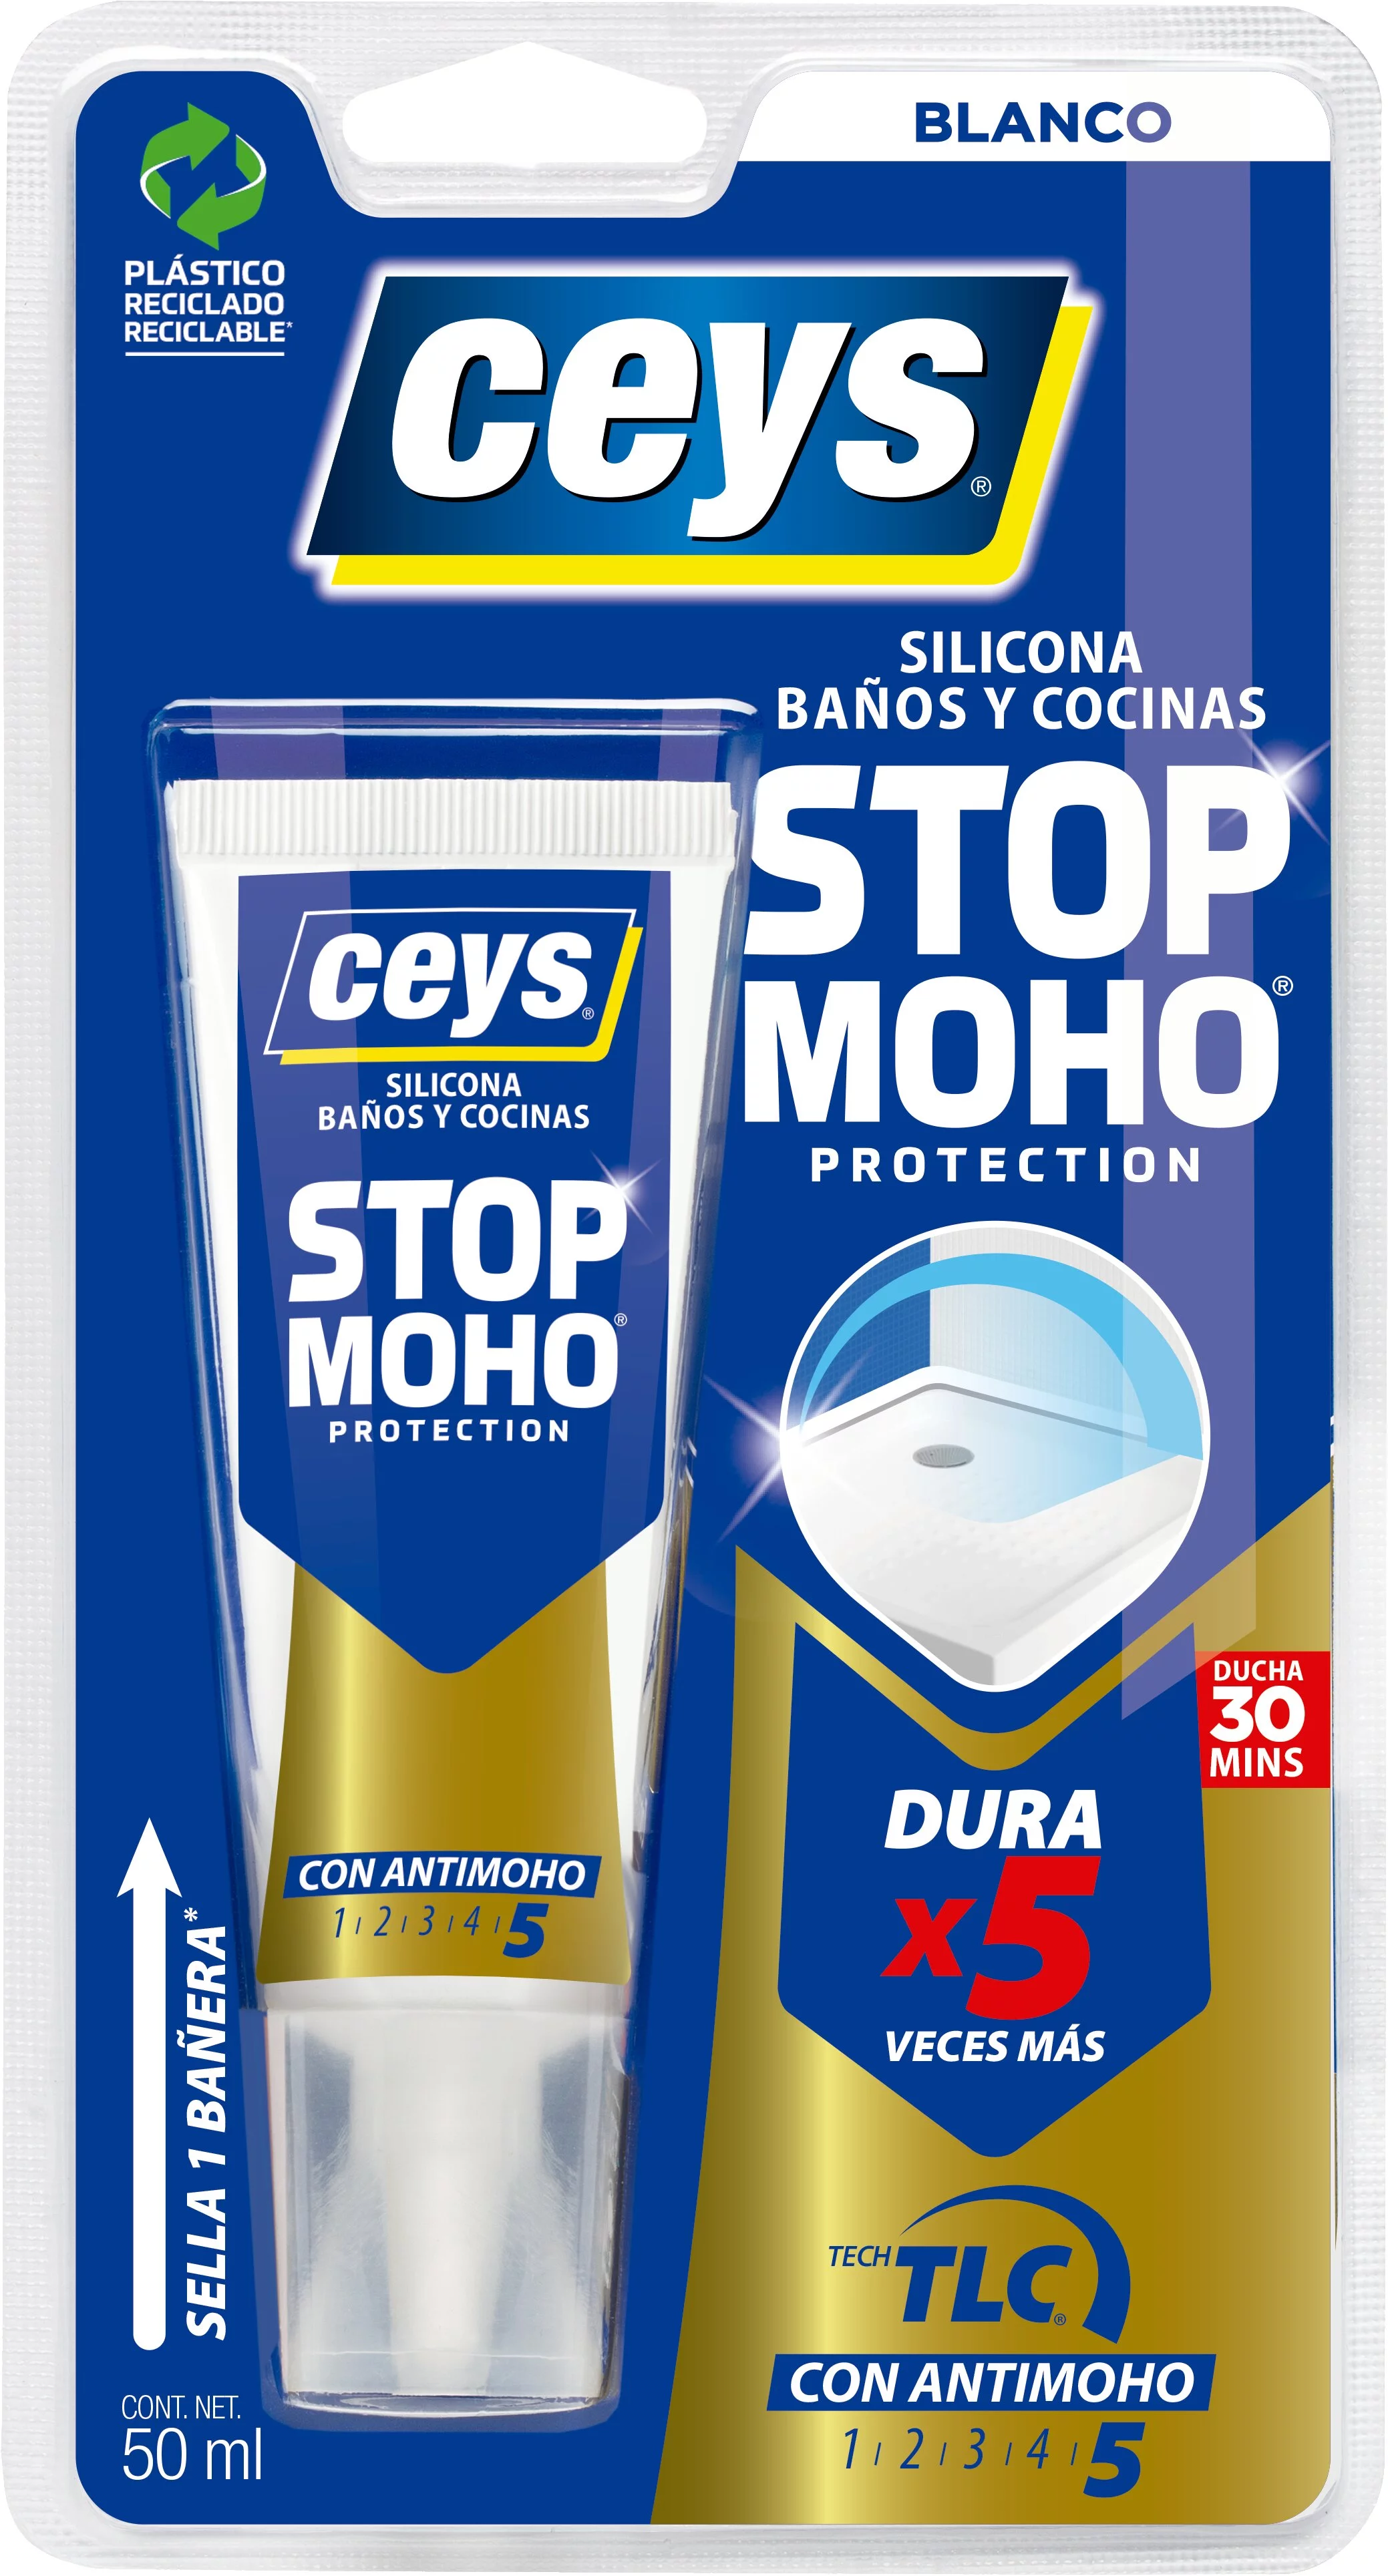 STOP MOHO PROTECTION